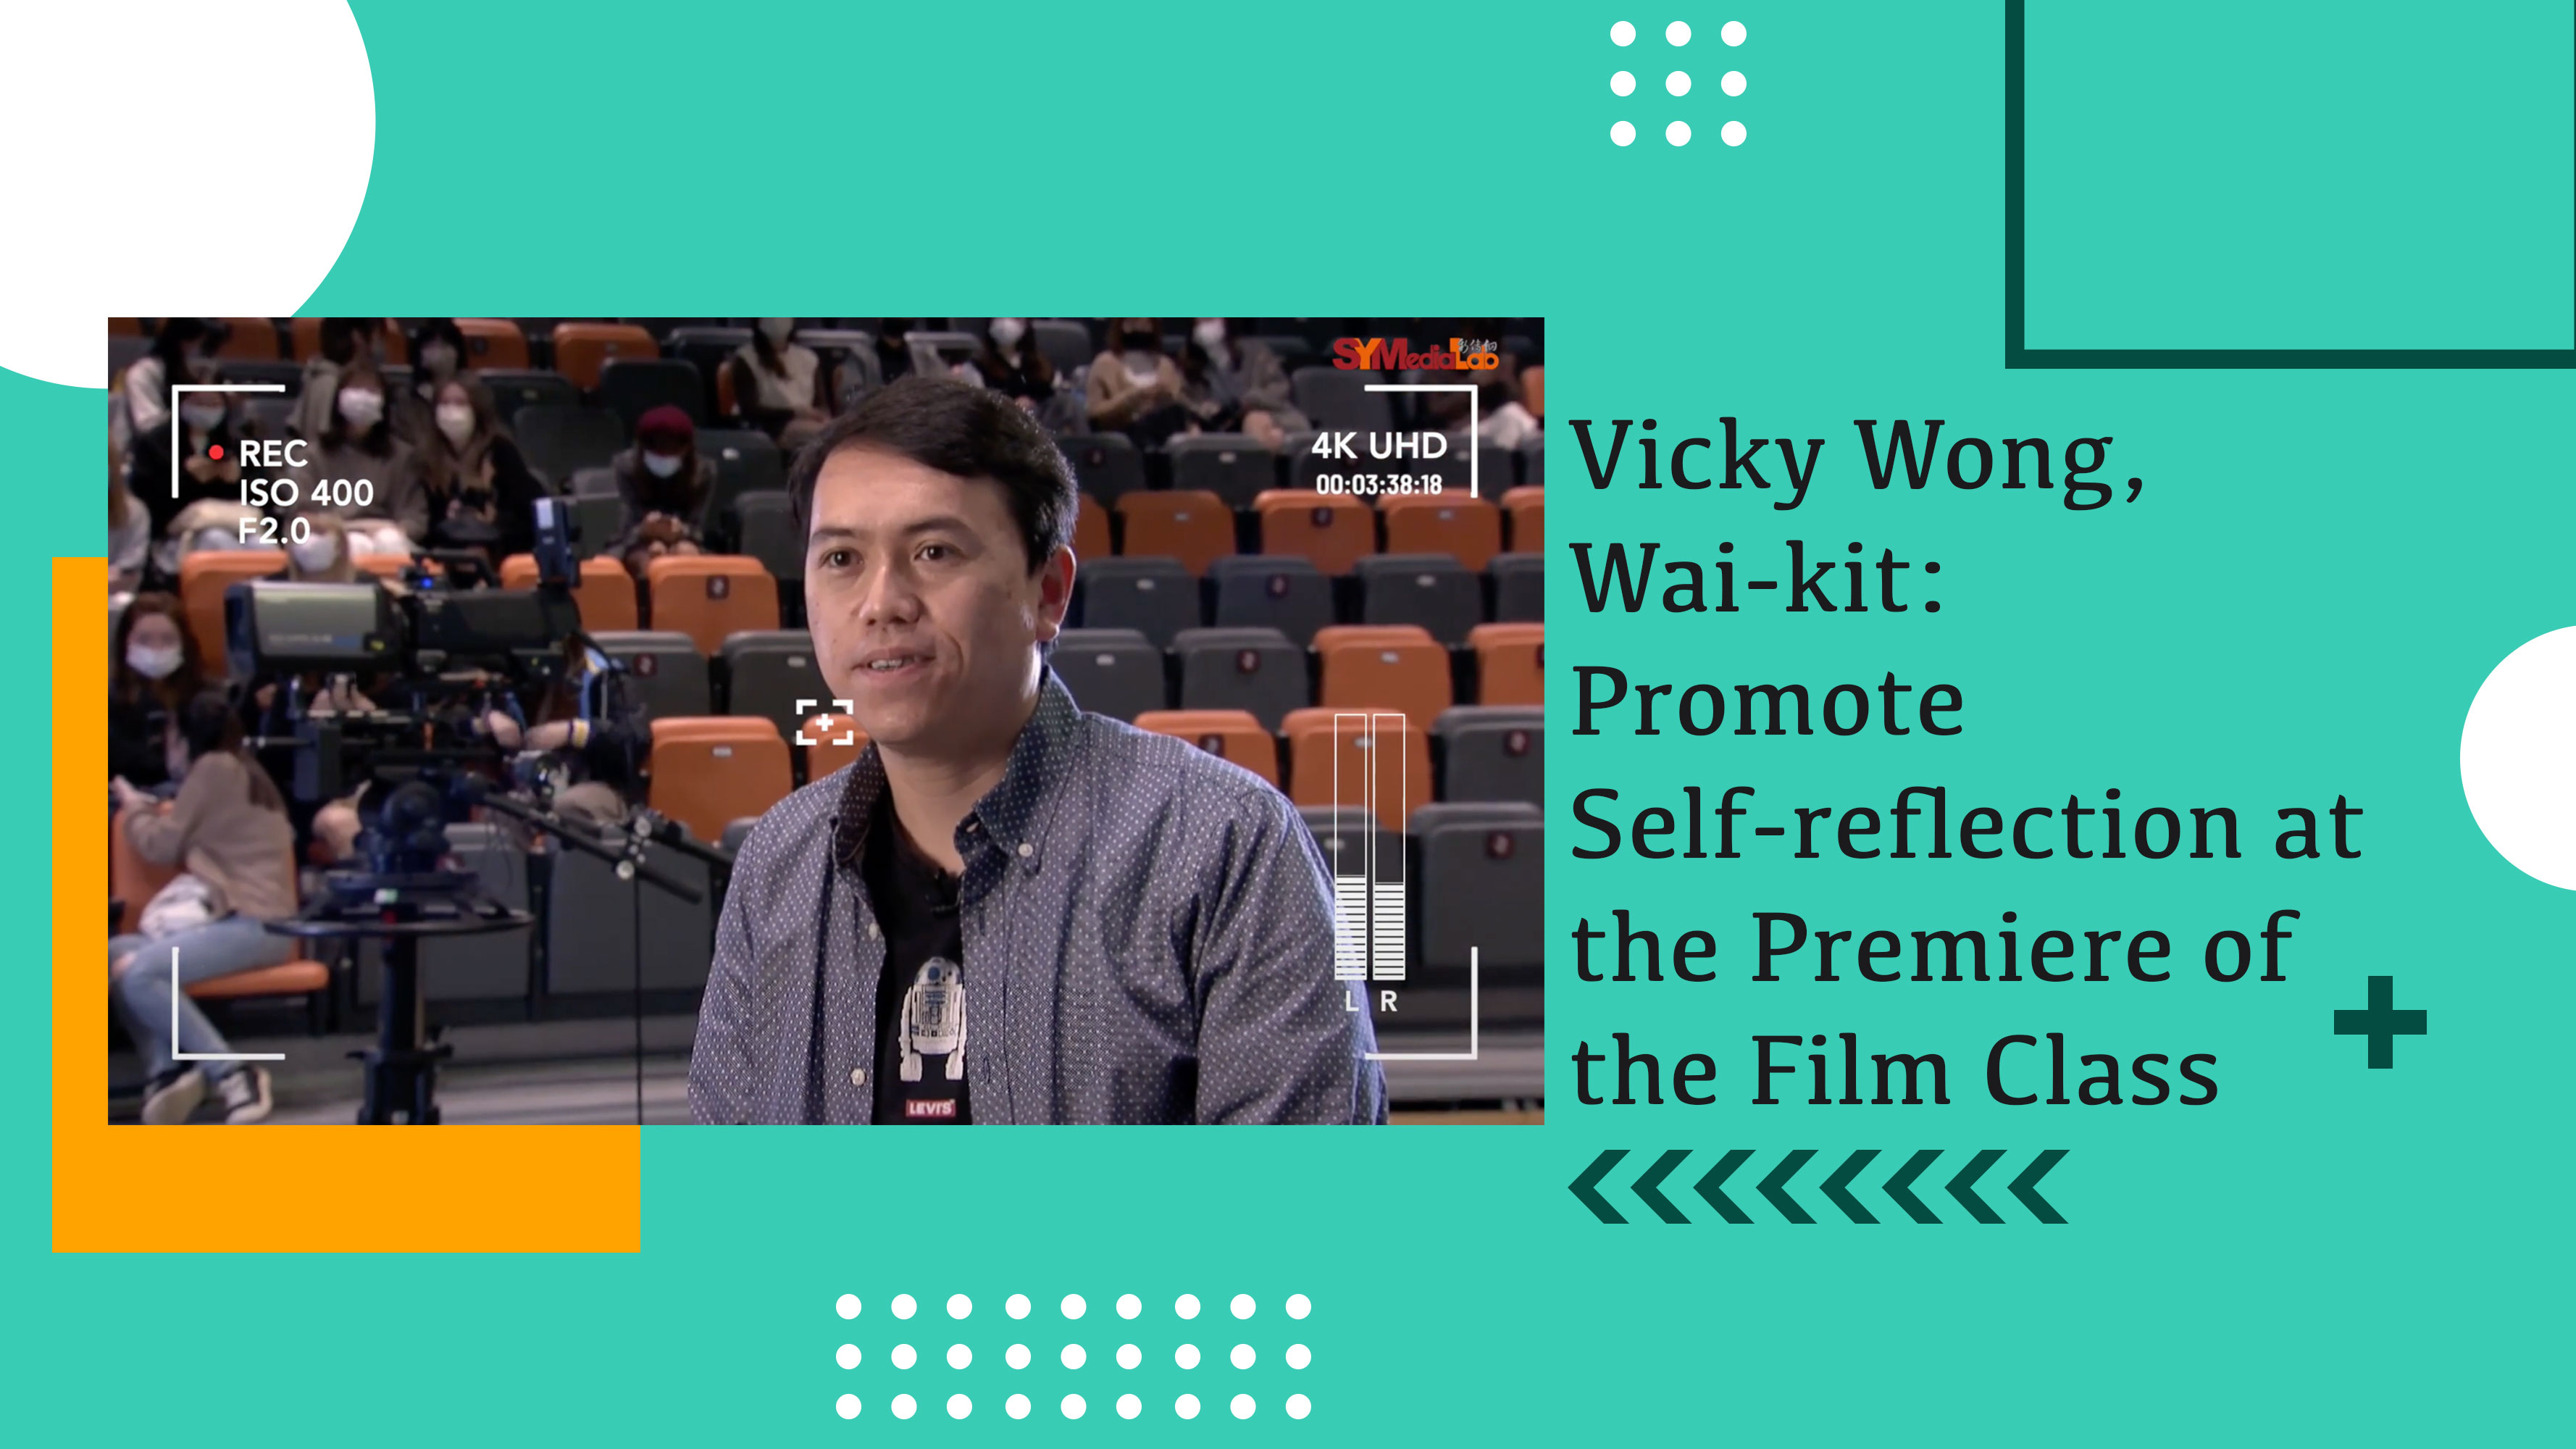 Vicky Wong, Wai-kit: Promote Self-reflection at the Premiere of the Film Class